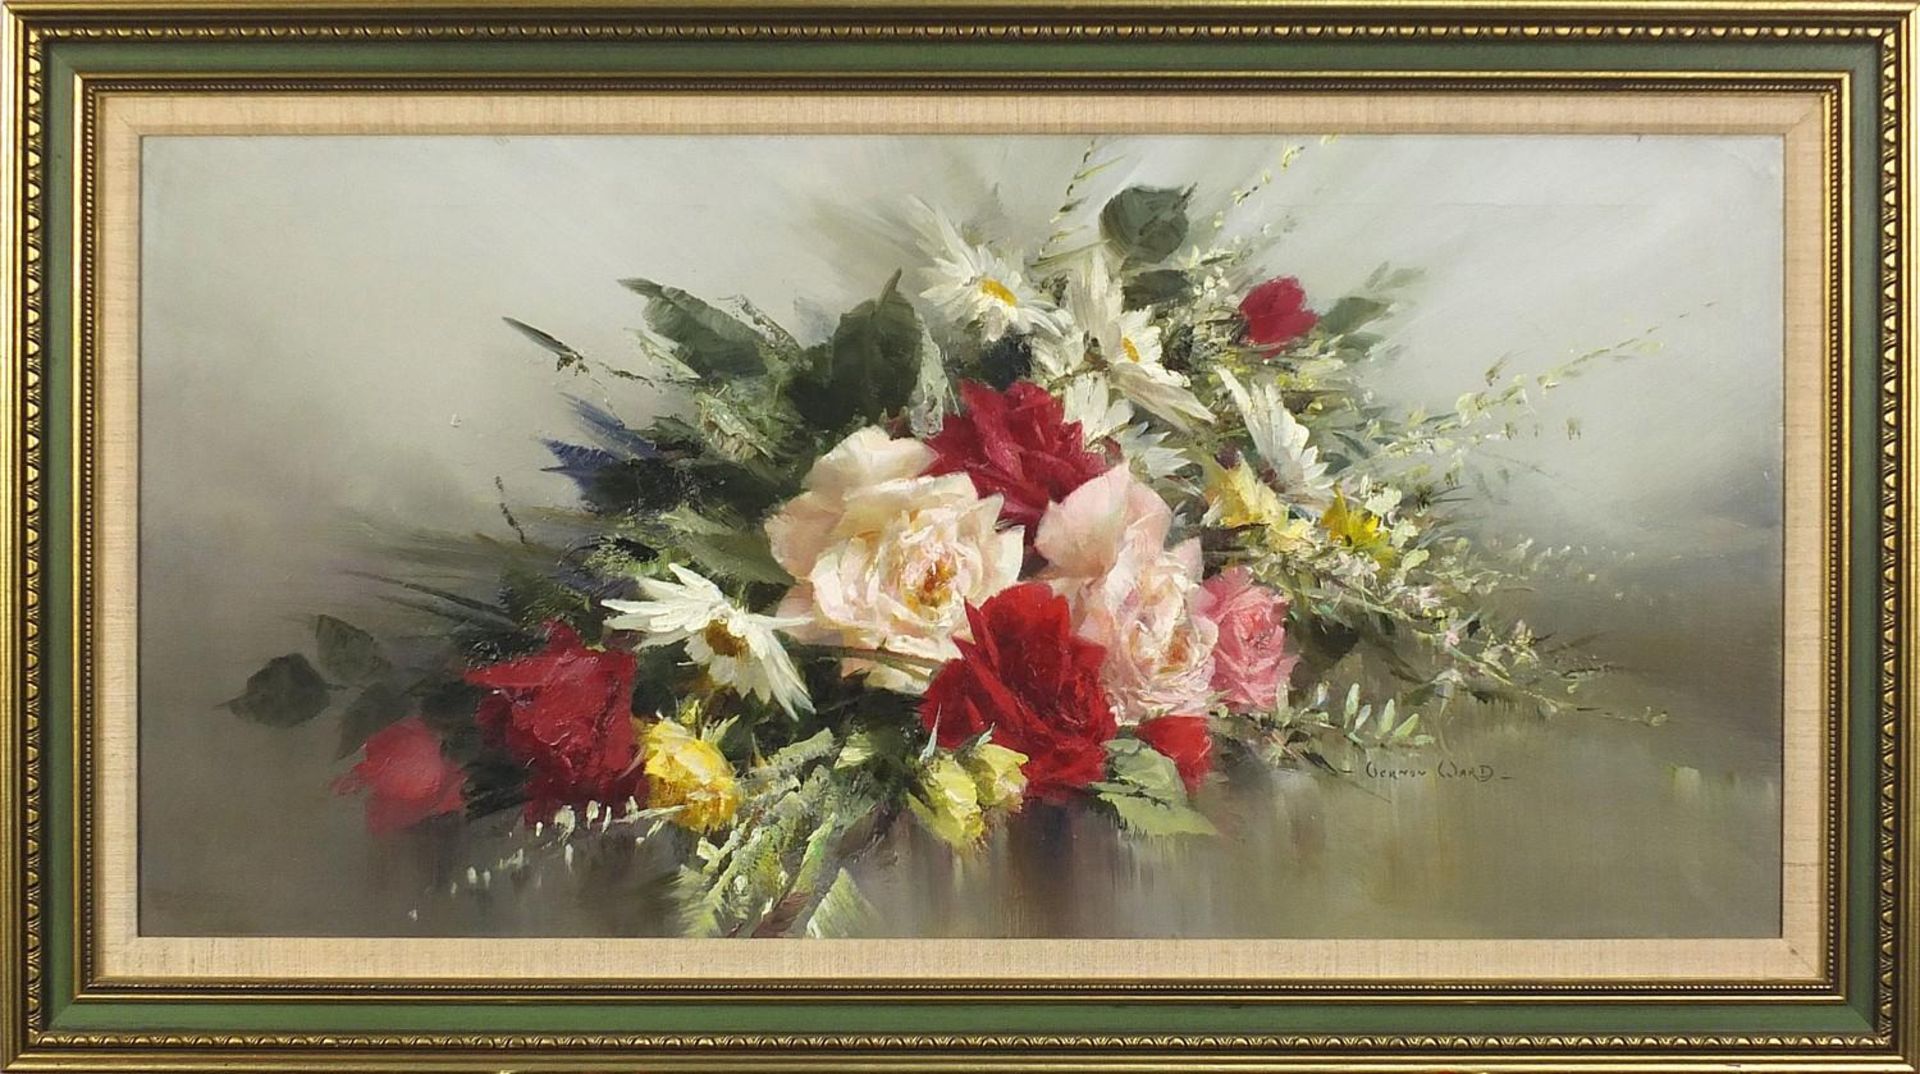 ** WITHDRAWN ** Vernon Ward - Still life flowers, oil on canvas, inscribed From the garden in June - Image 2 of 8